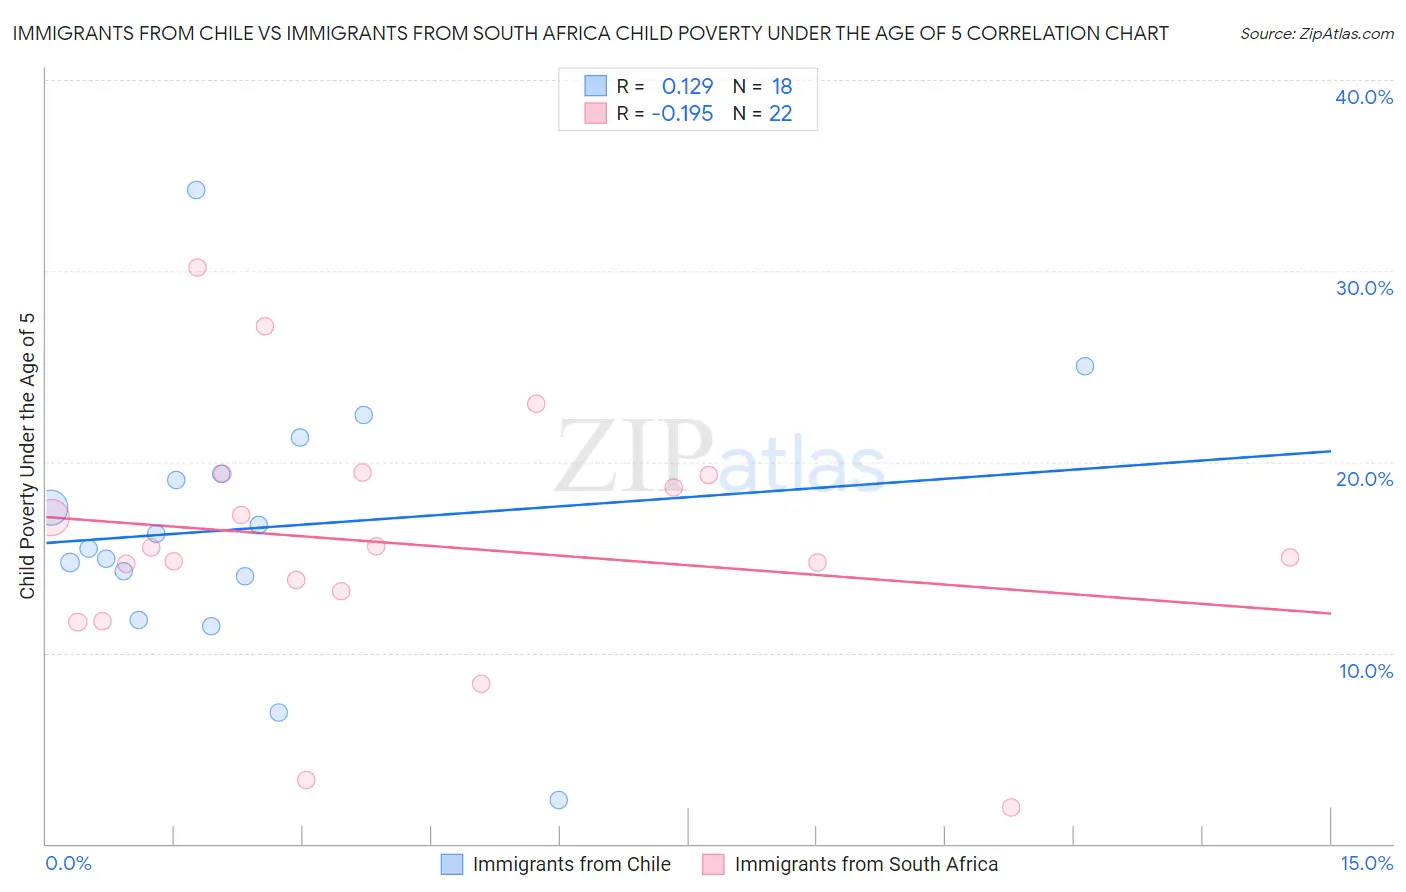 Immigrants from Chile vs Immigrants from South Africa Child Poverty Under the Age of 5